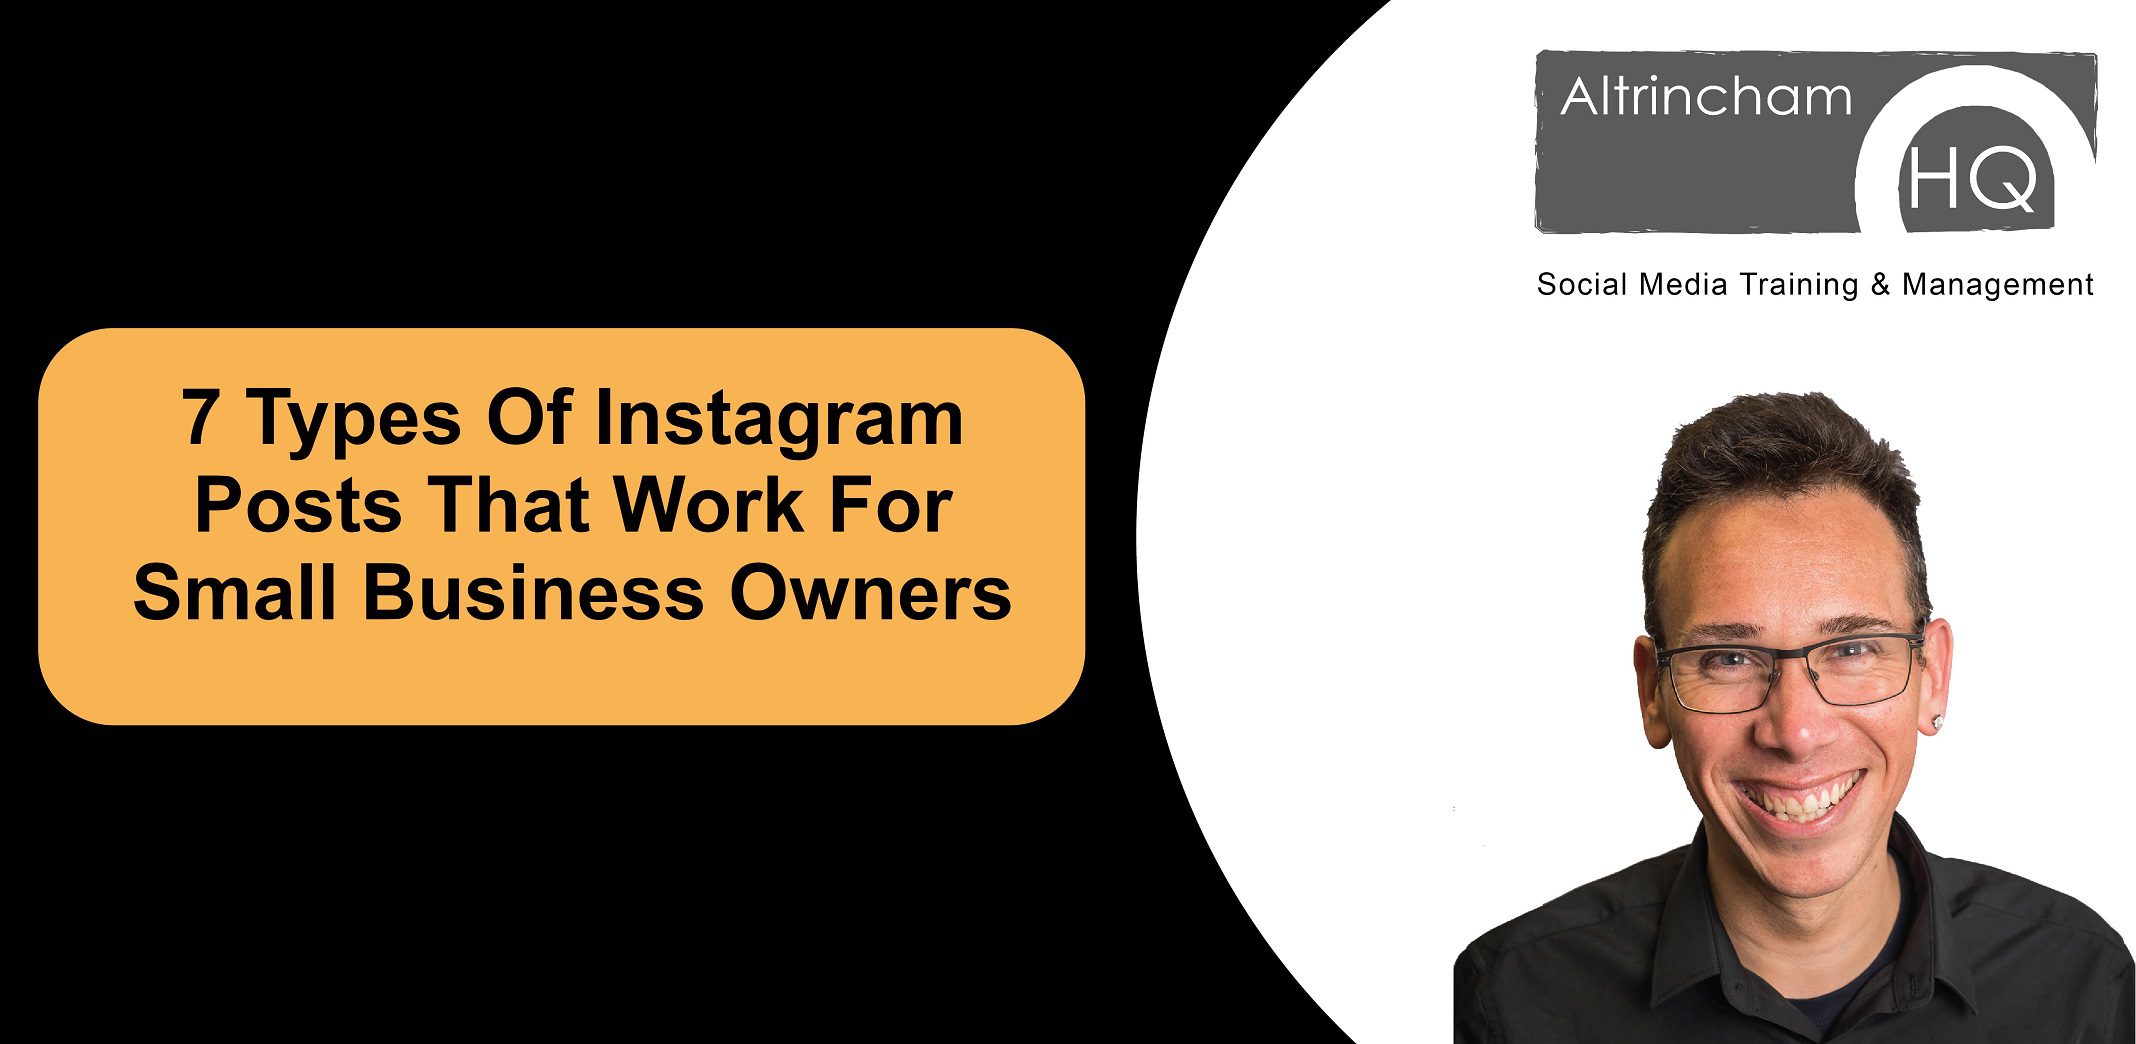 7 Types Of Instagram Posts That Work For Small Business Owners